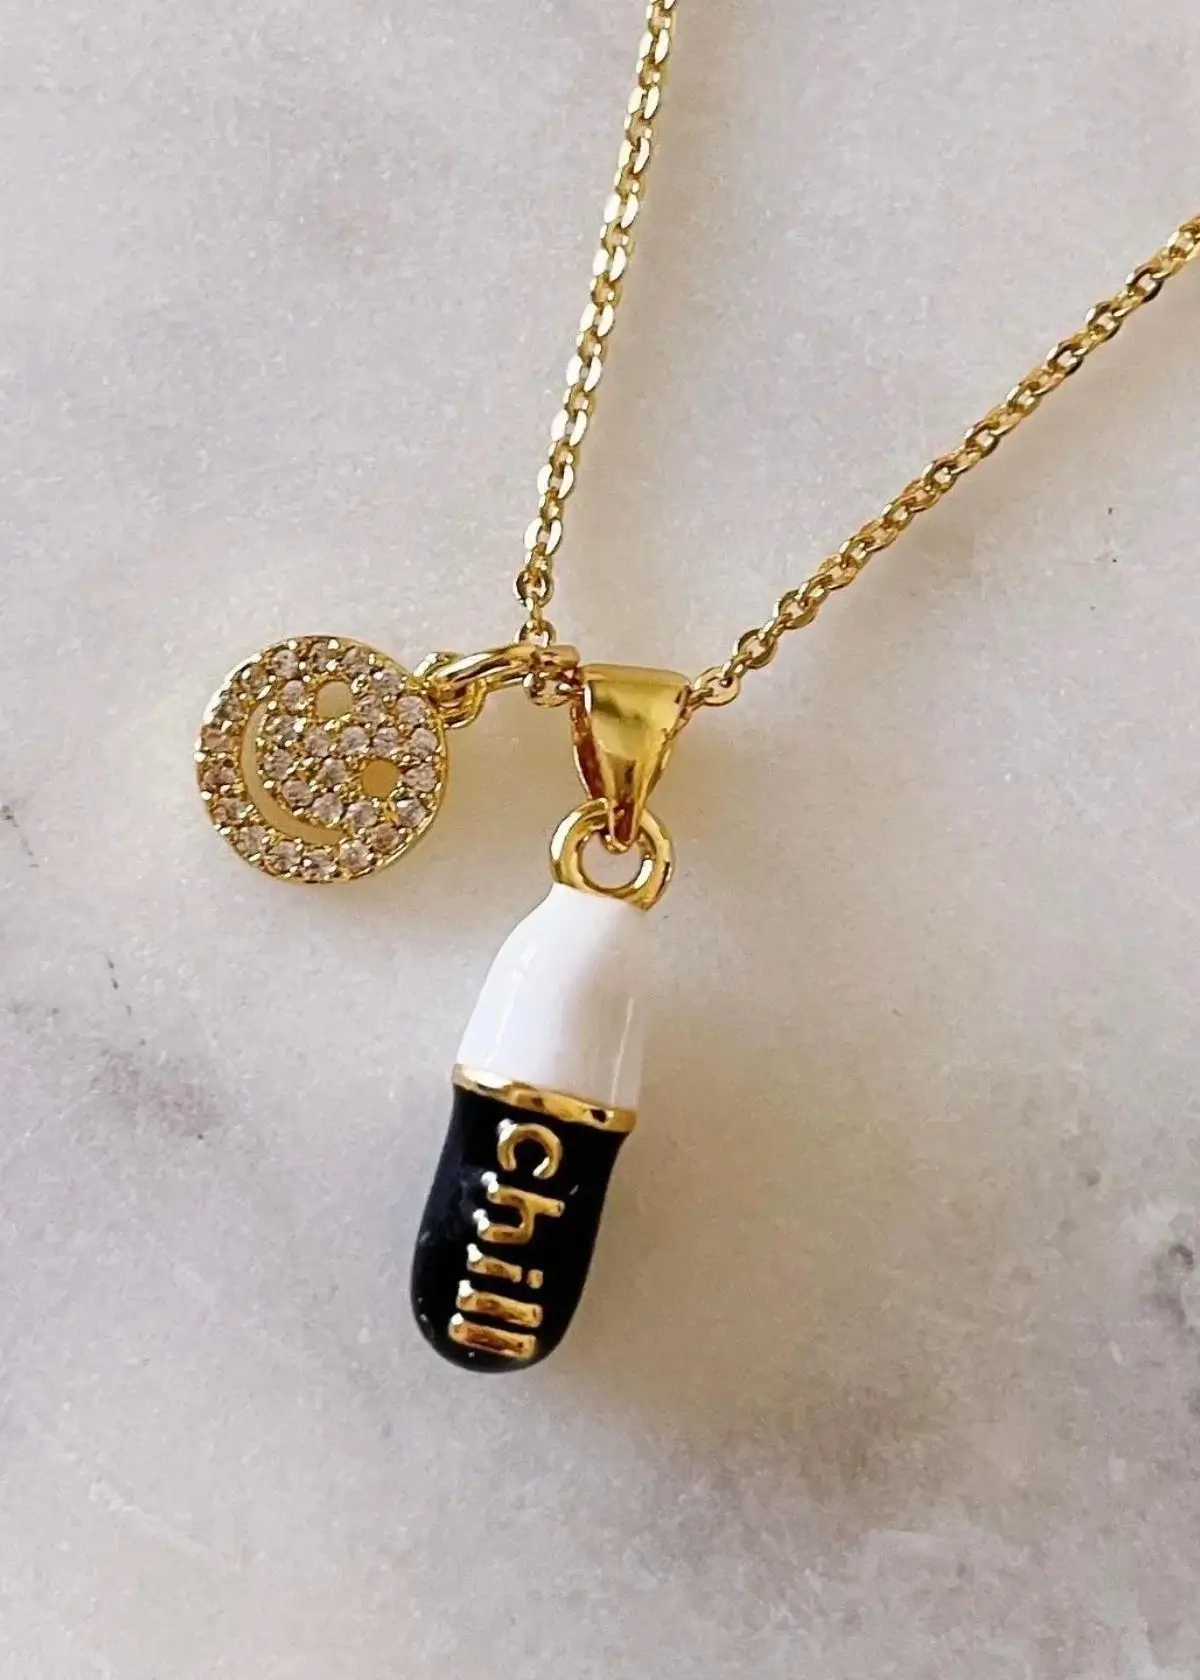 What does a chill pill necklace symbolize?